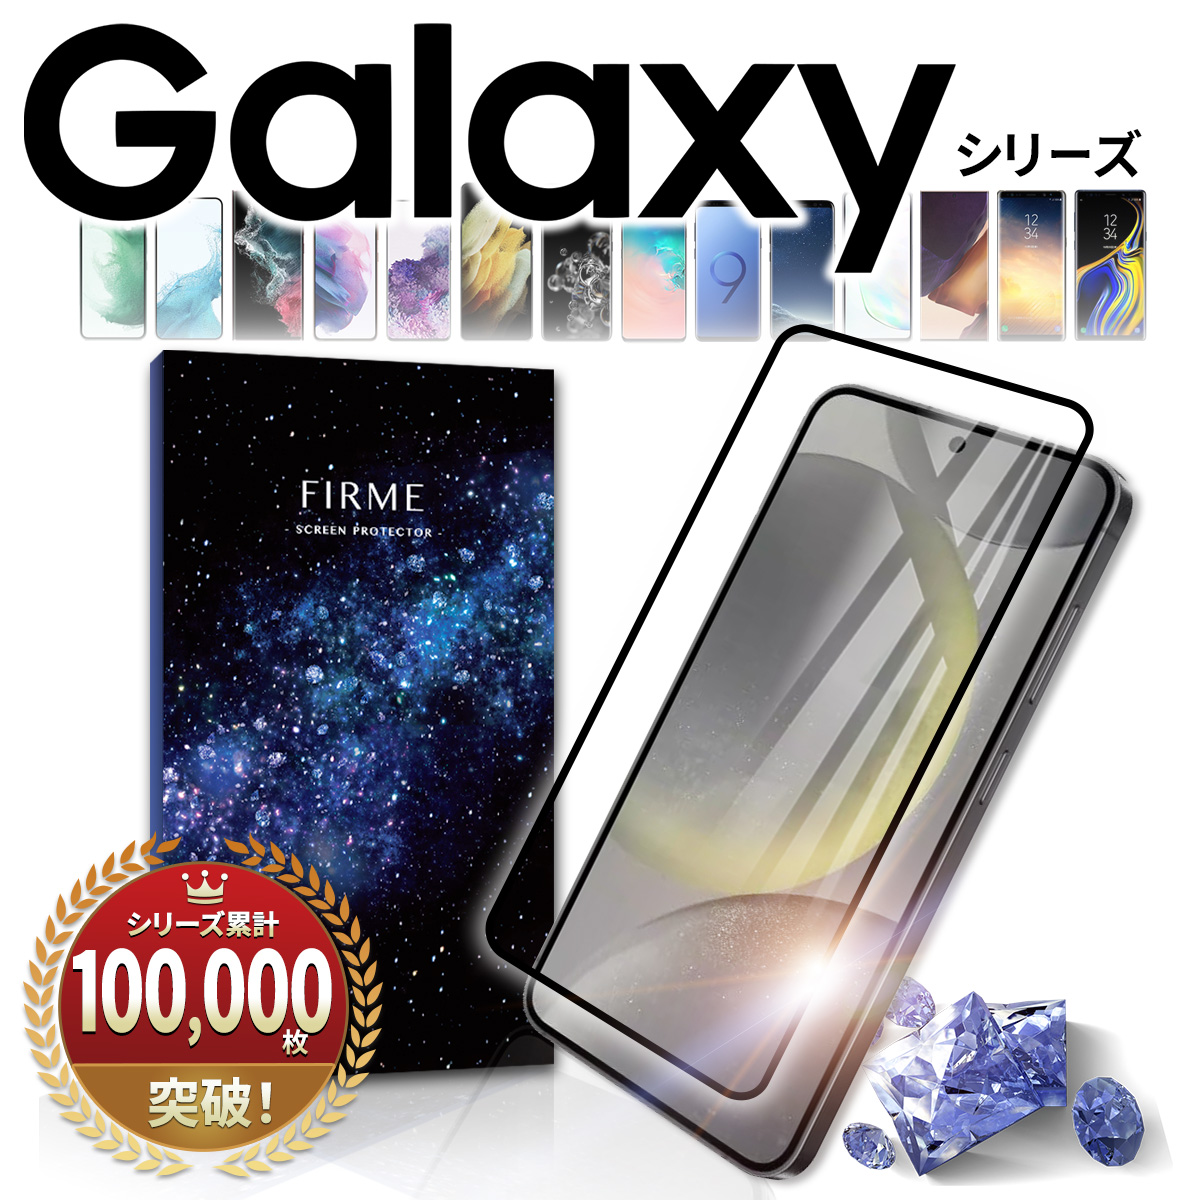 Galaxy S24 Ultra ガラス フィルム S23 Ultra S22 S21 S21+ S10+ S20 S22 ultra S10 S9 ギャラクシー 液晶 保護フィルム カバー 全面 硝子 3D 10H 透明 クリア